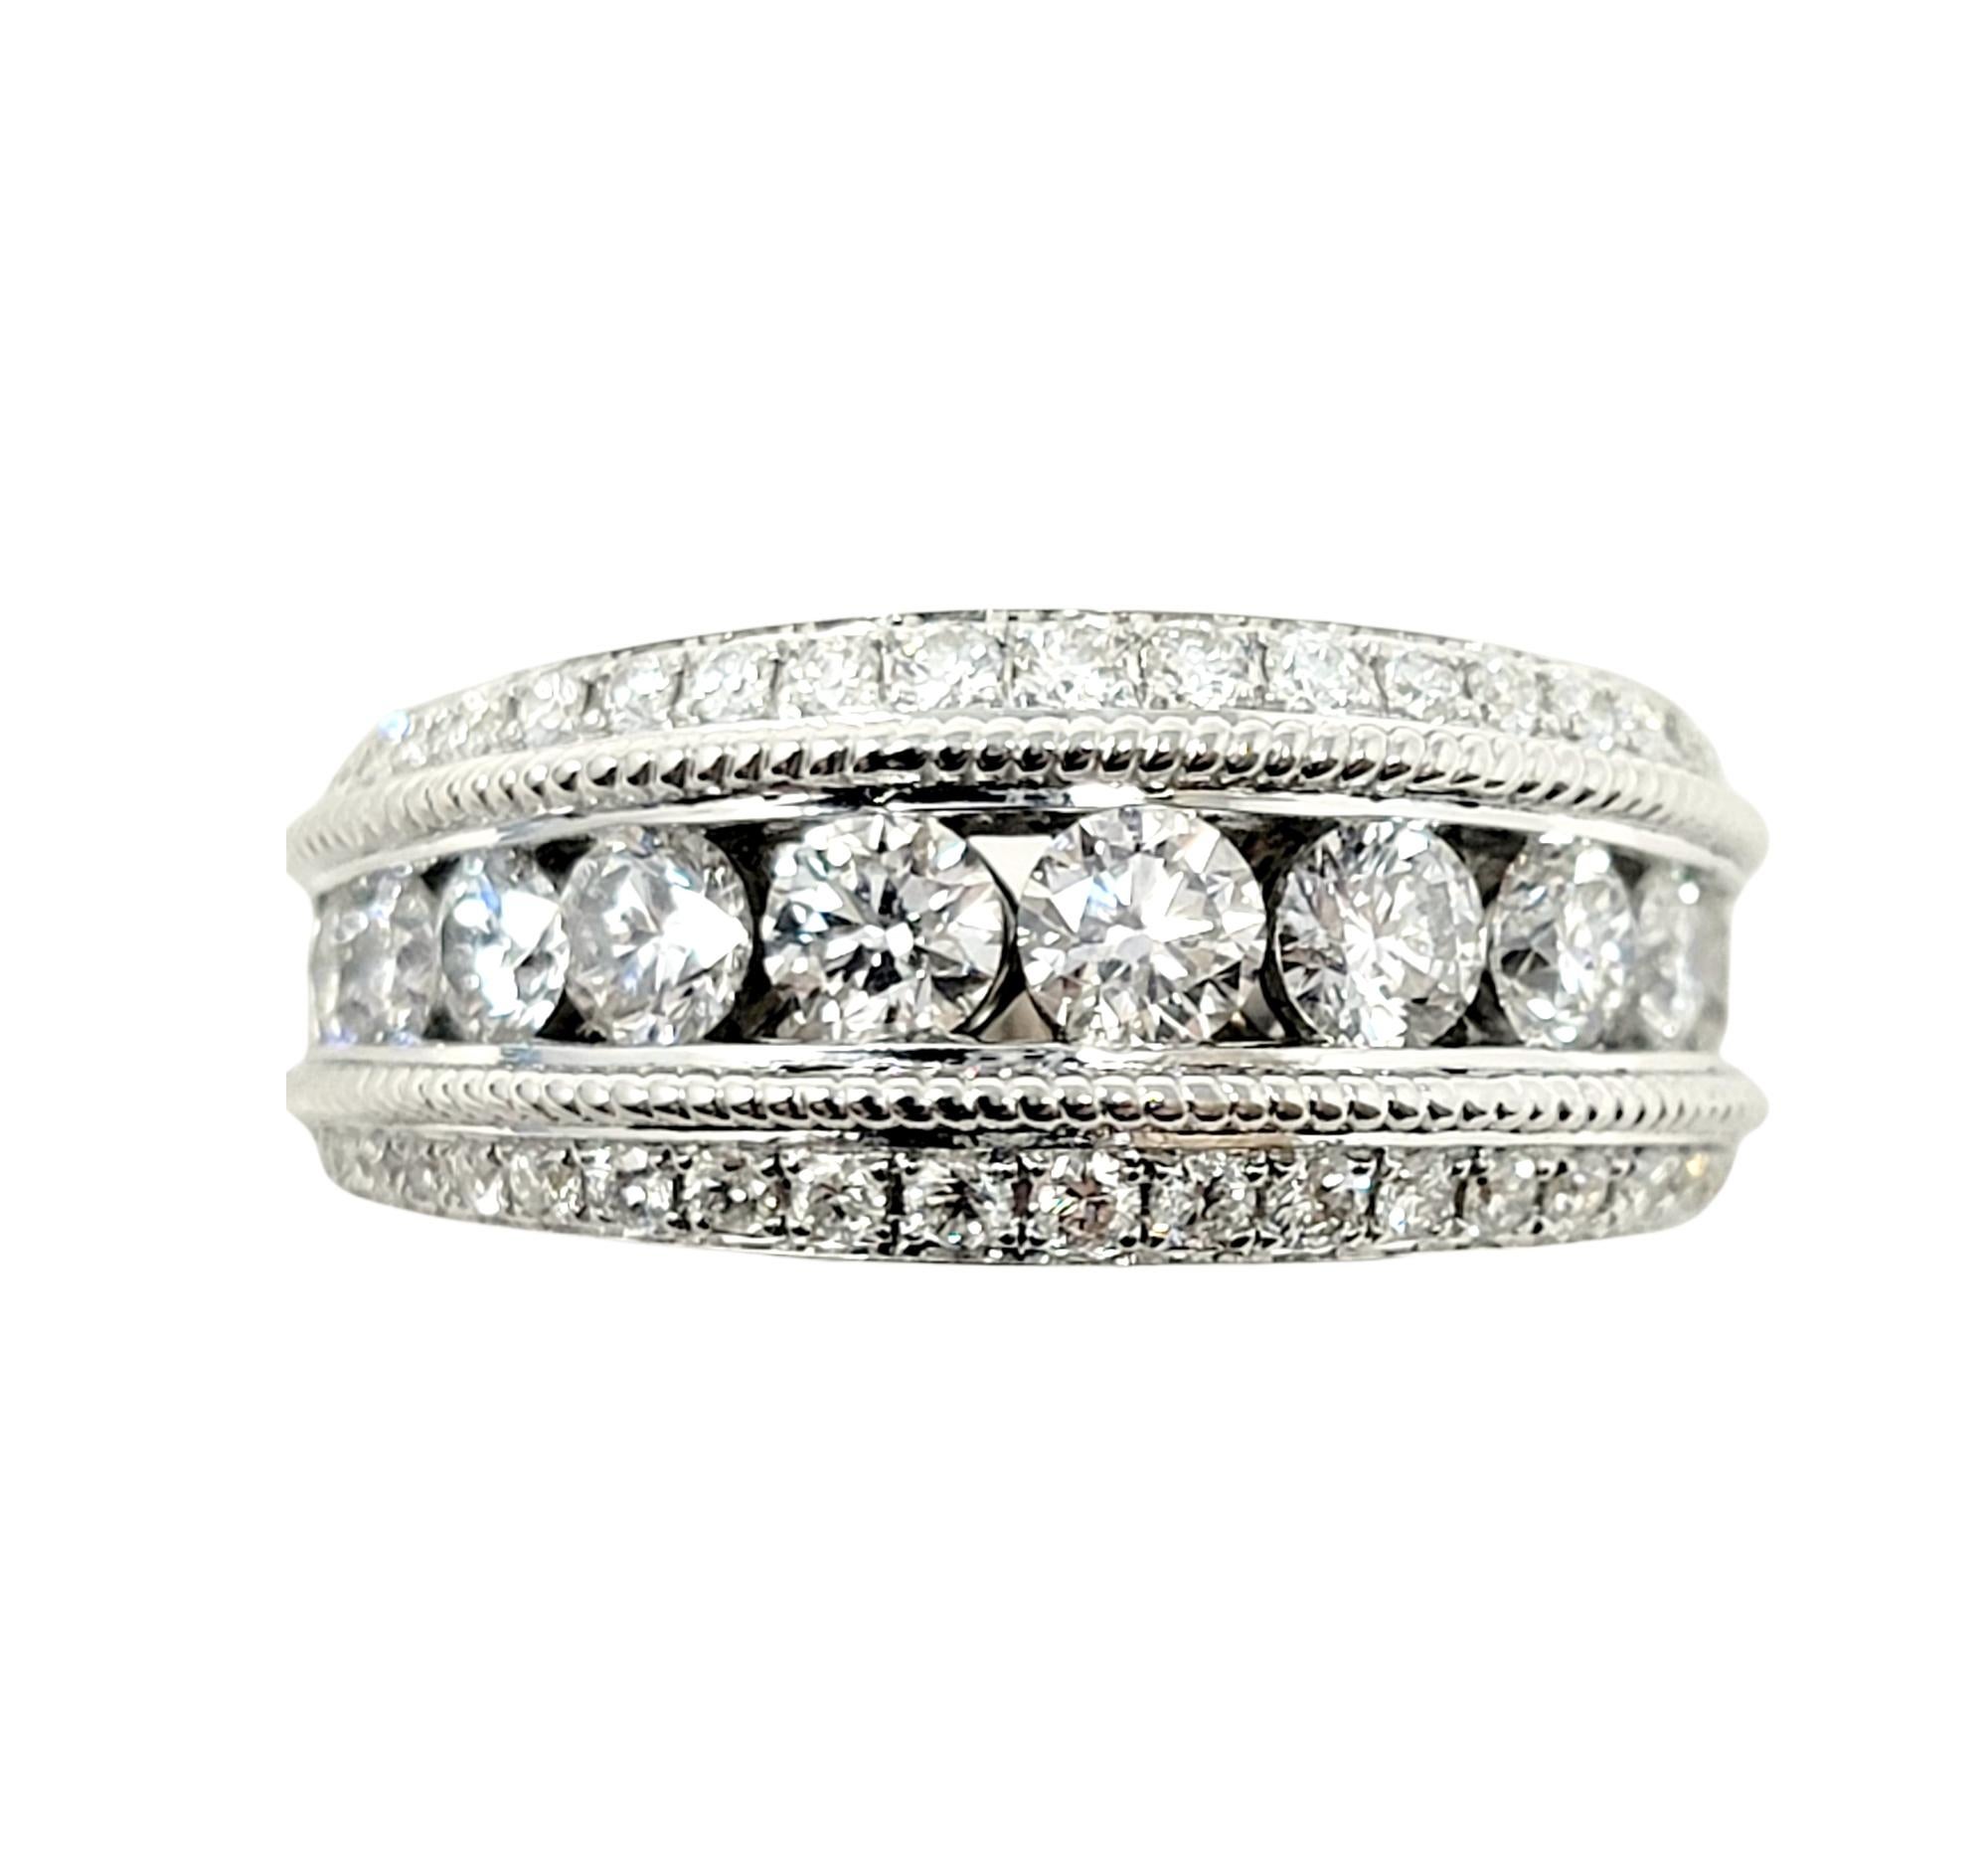 Ring size: 8.75

Absolutely gorgeous graduated diamond band ring with 3 row design. This sparkling beauty features 11 icy white round brilliant diamonds channel set in a single row down the center of the piece. Bordering the center diamonds are 2